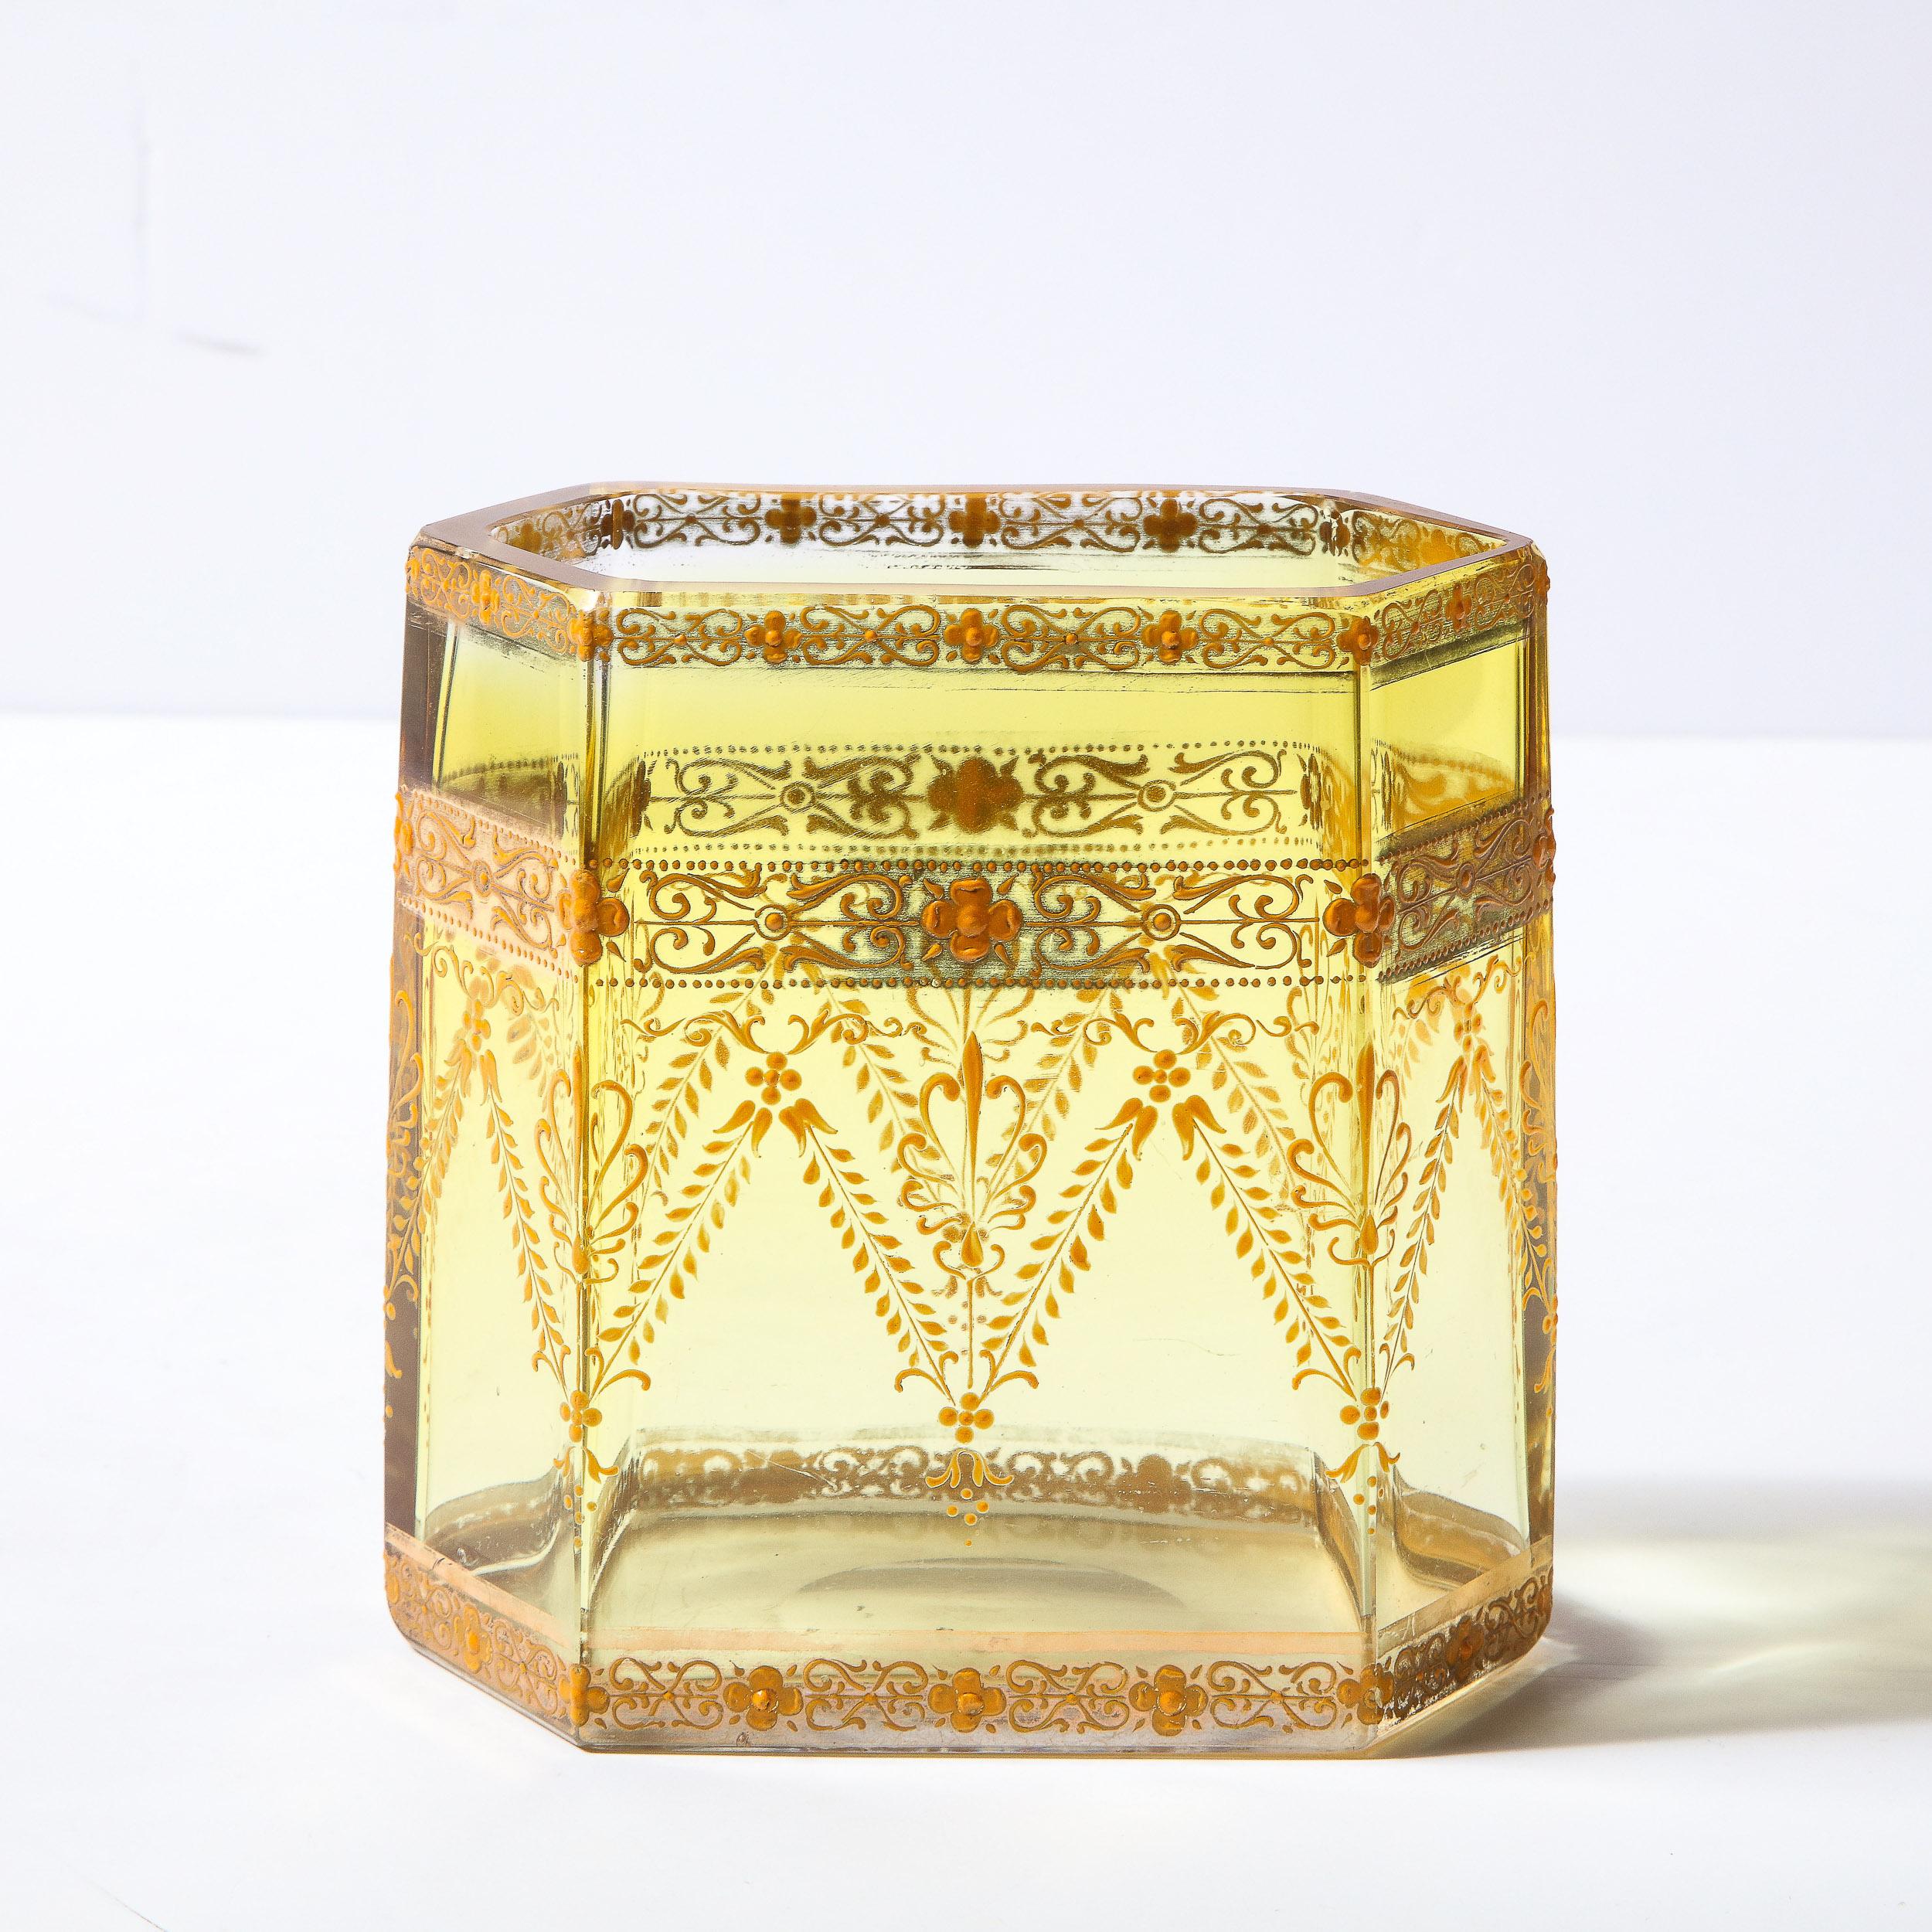 This elegant and sophisticated Art Nouveau Vase/ vessel was realized by the esteemed studio of Moser in Czechoslovakia circa 1910. It features an elongated hexagonal shape in amber tinted glass. The exterior offers a wealth of neoclassical forms-